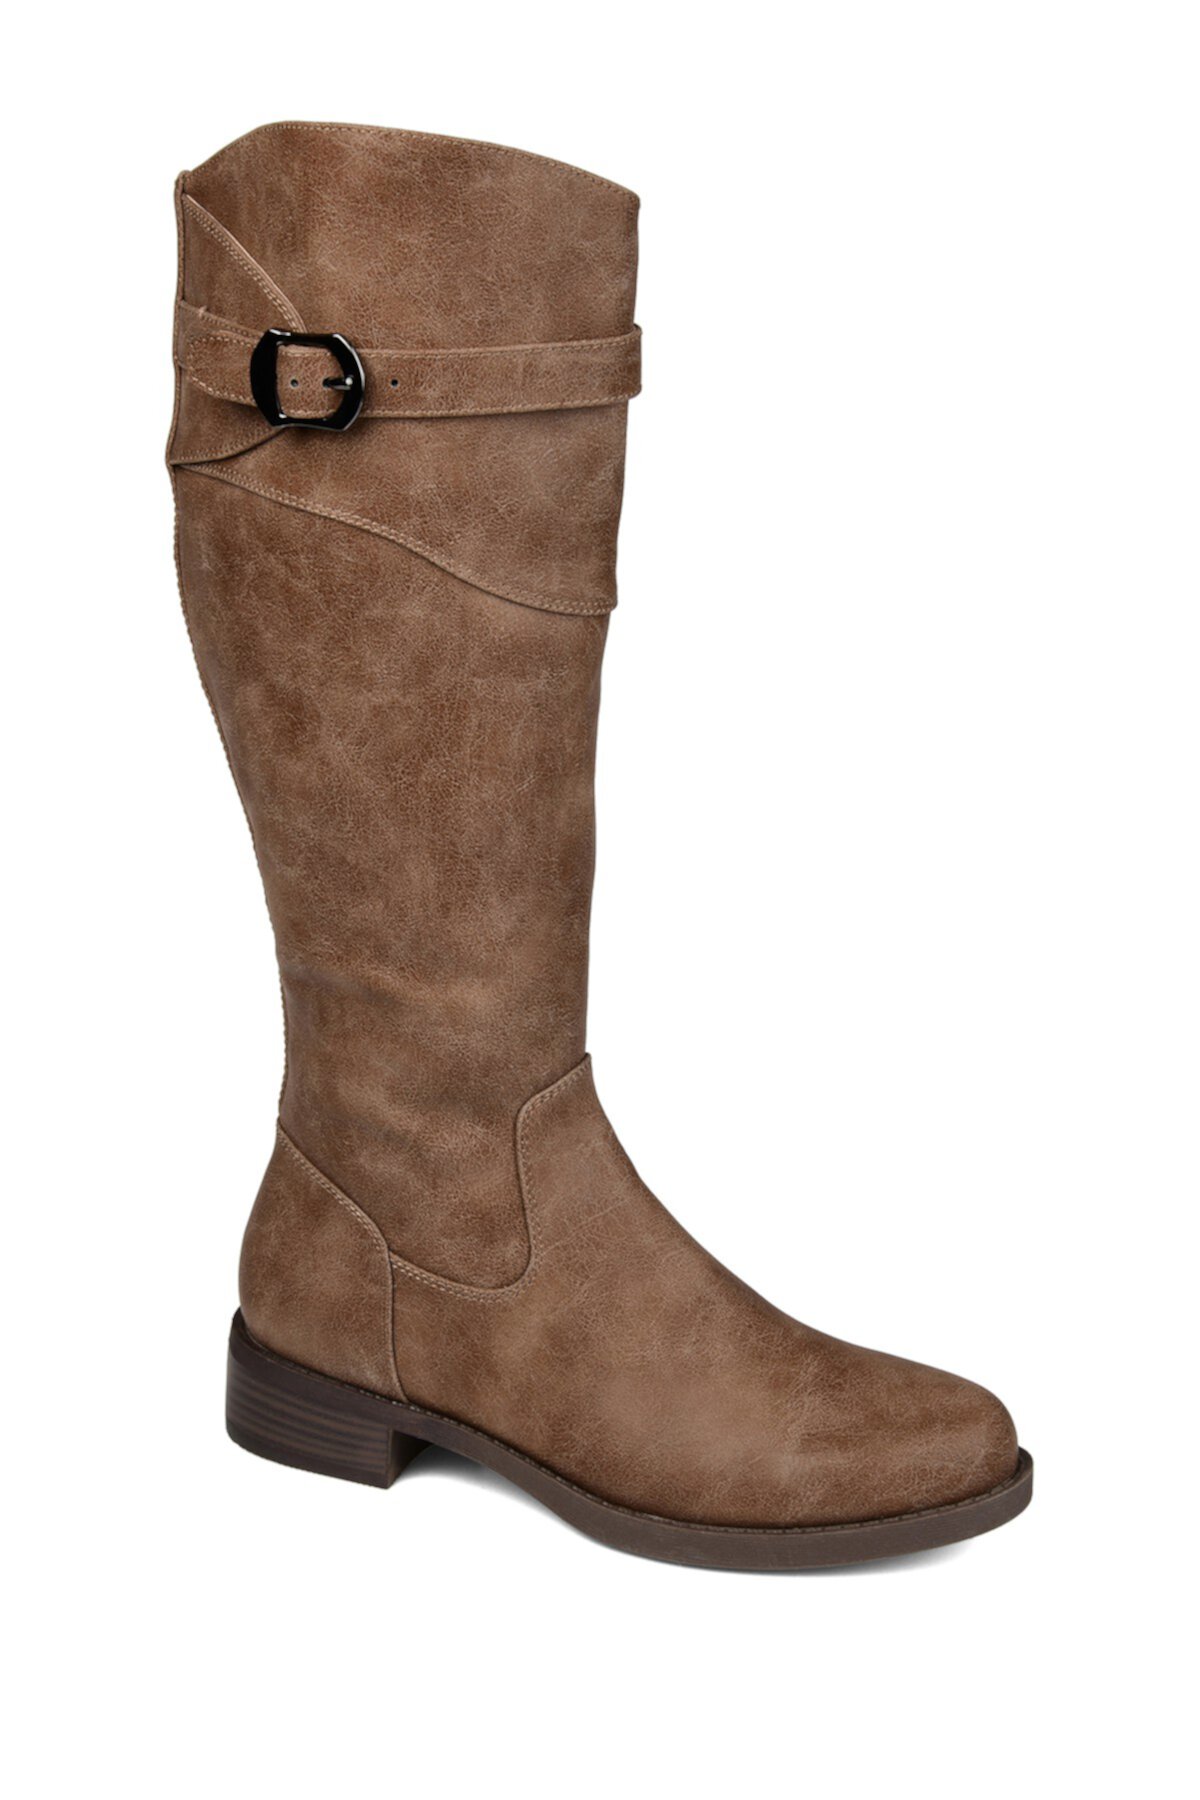 Brooklyn Boot Journee Collection